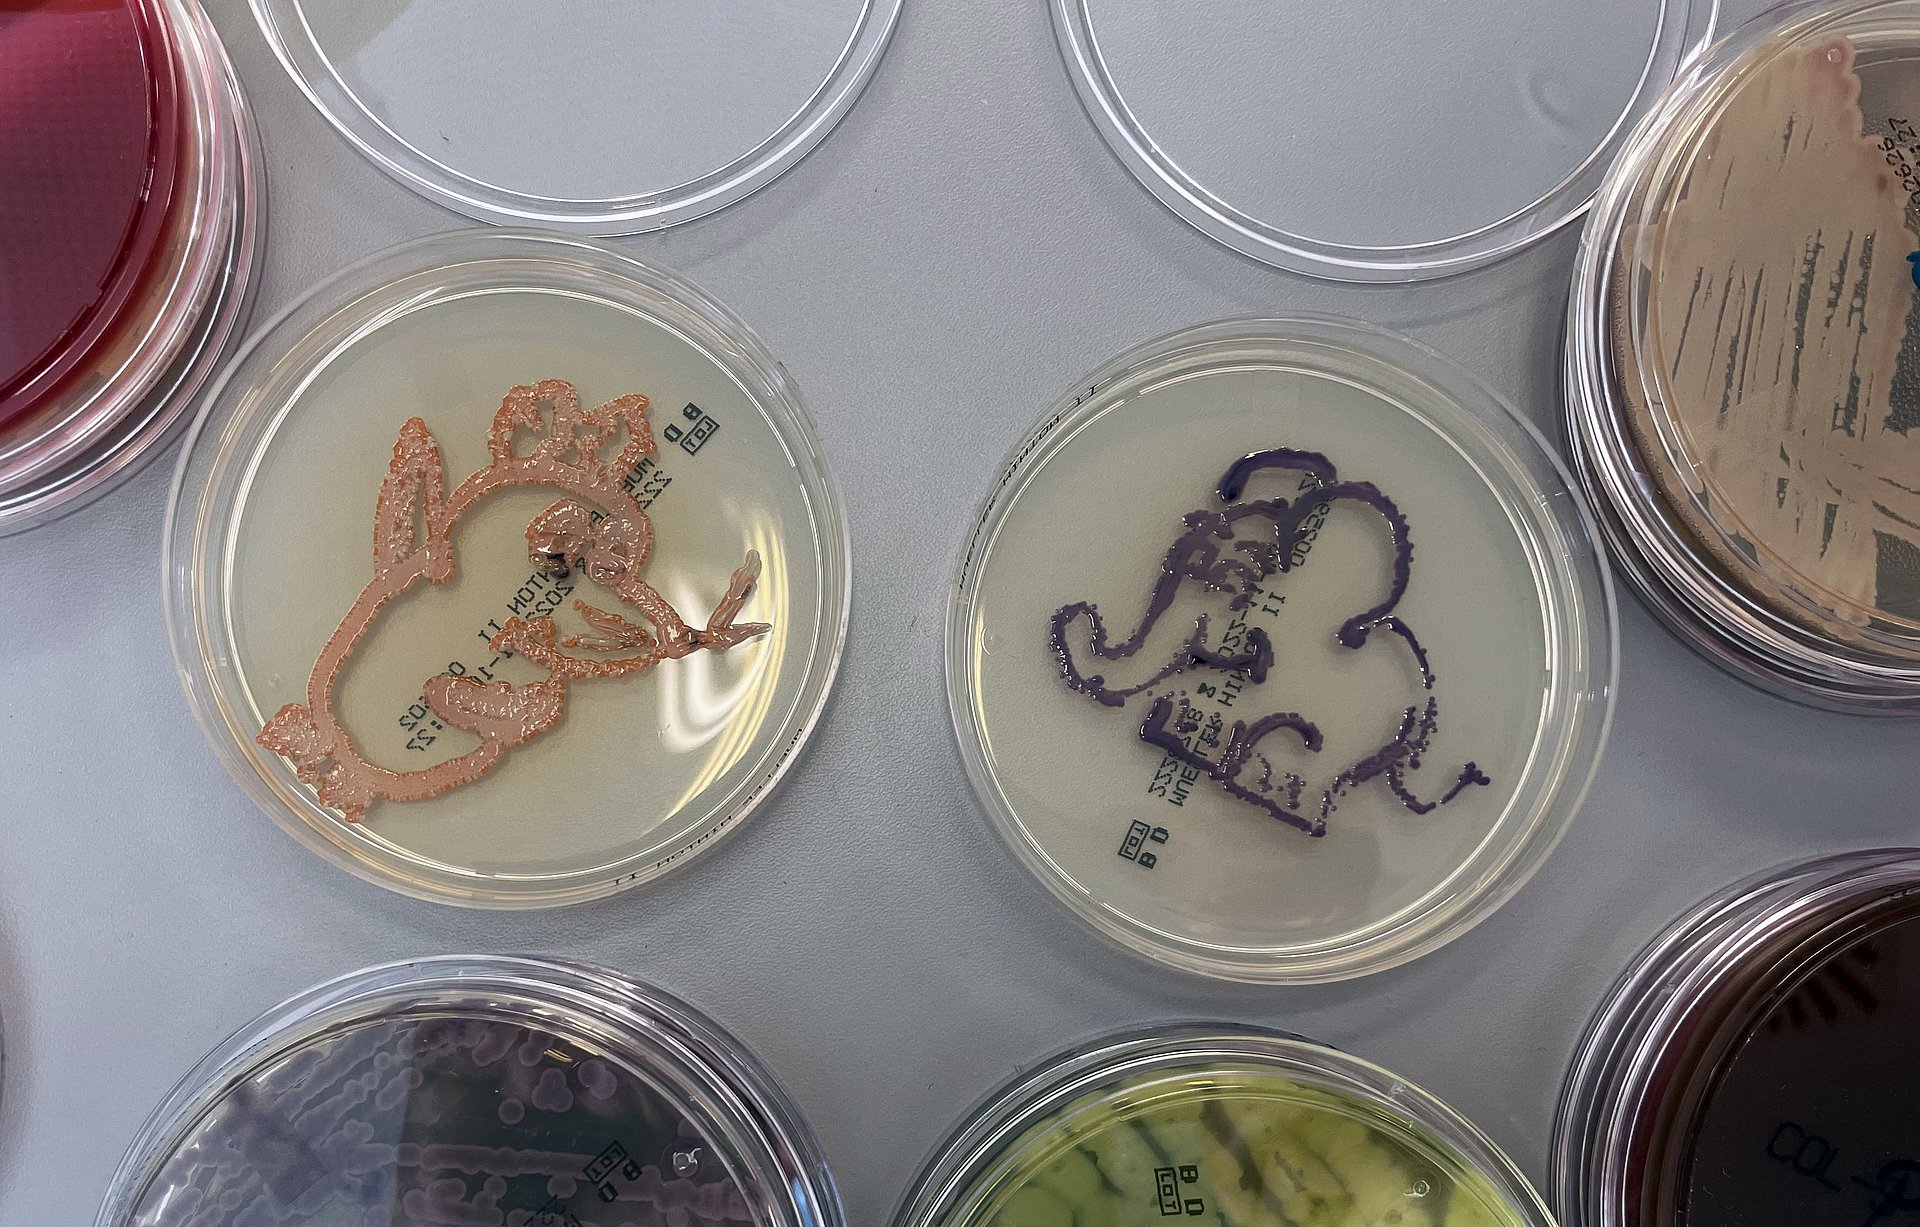 Petri dishes with mouse and elephant pattern